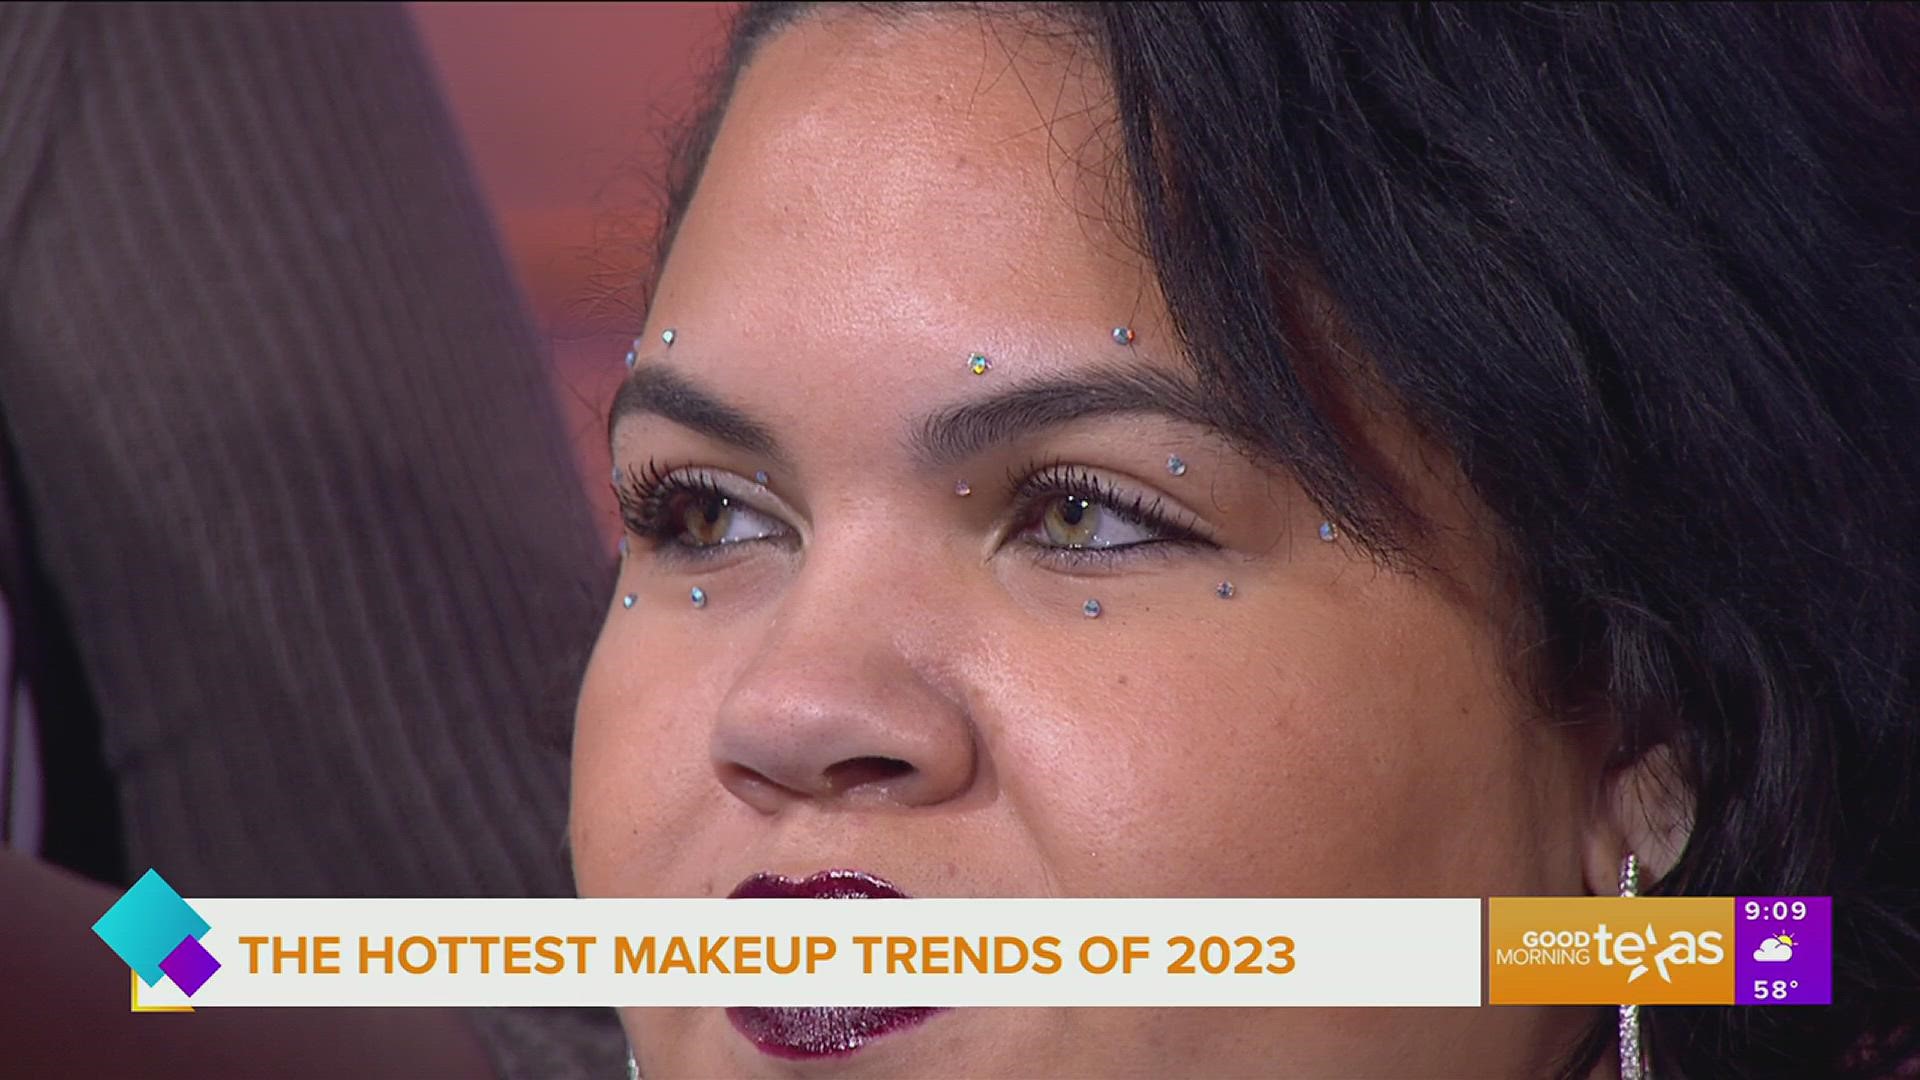 The Hottest Makeup Trends Of 2023